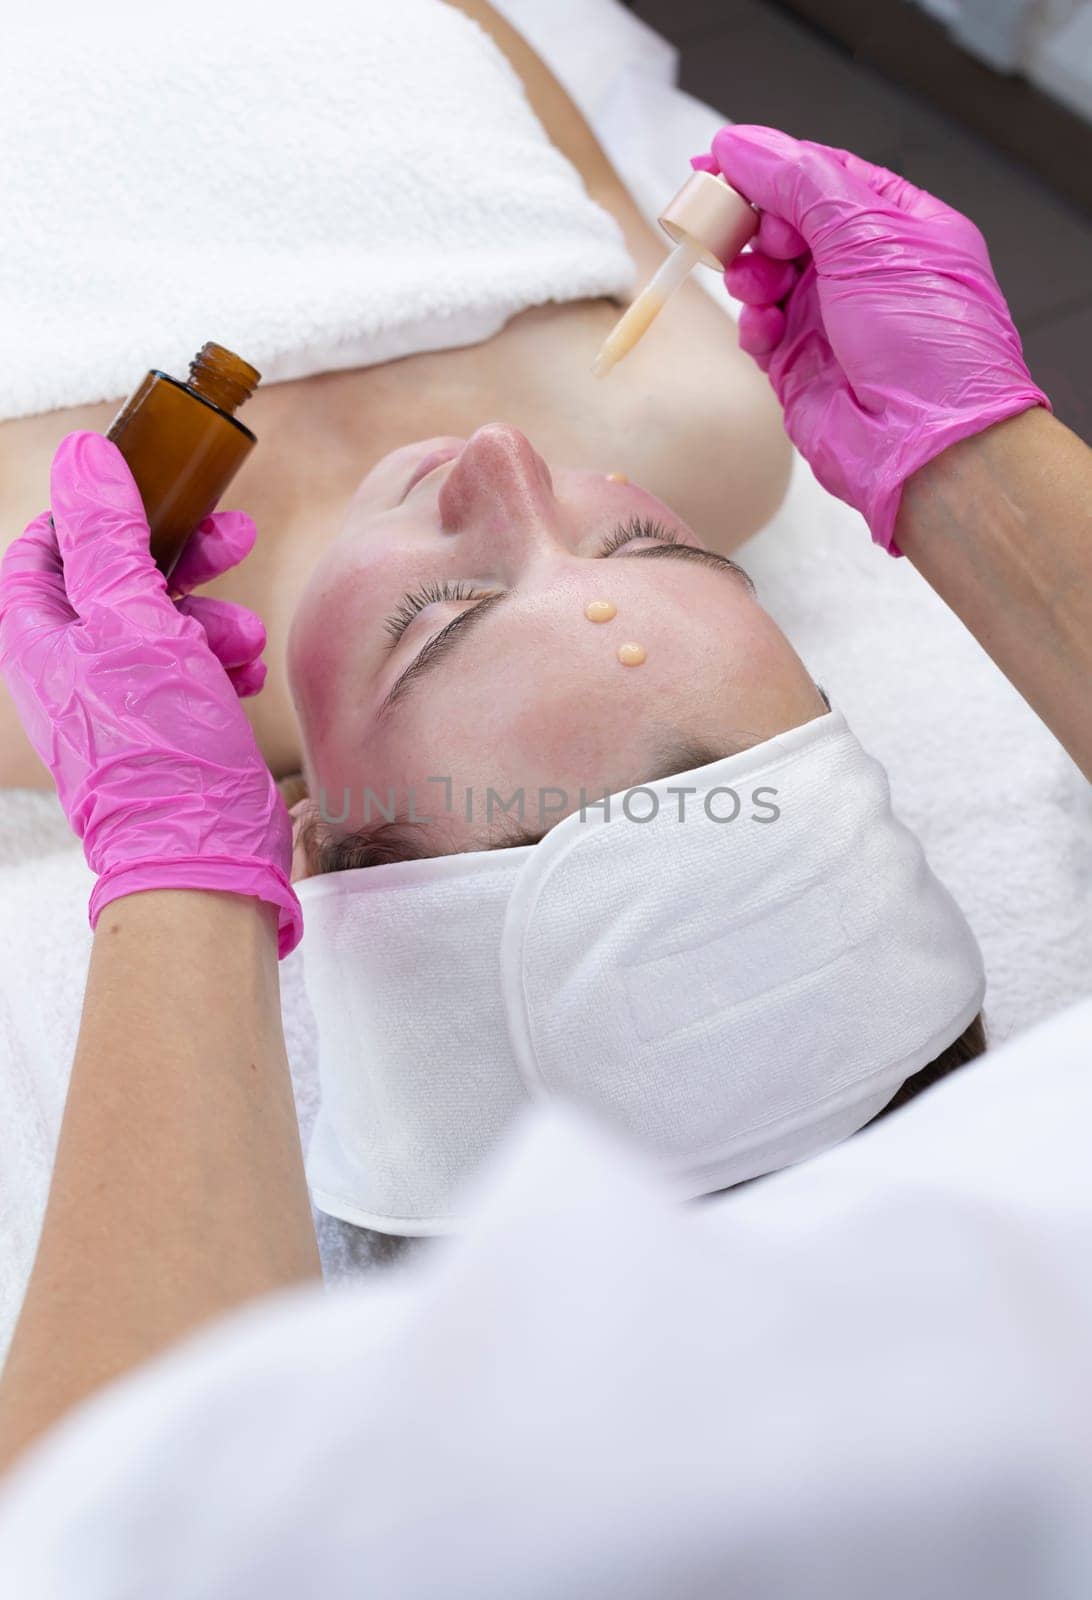 Beauty Specialist Applies Serum To Patient's Face With Pipette After Peeling Procedure In Spa Salon. Facial Skin Care With Treatment Cosmetic Oil And Serum. Woman Enjoys Skin Moisturizing Procedure by netatsi